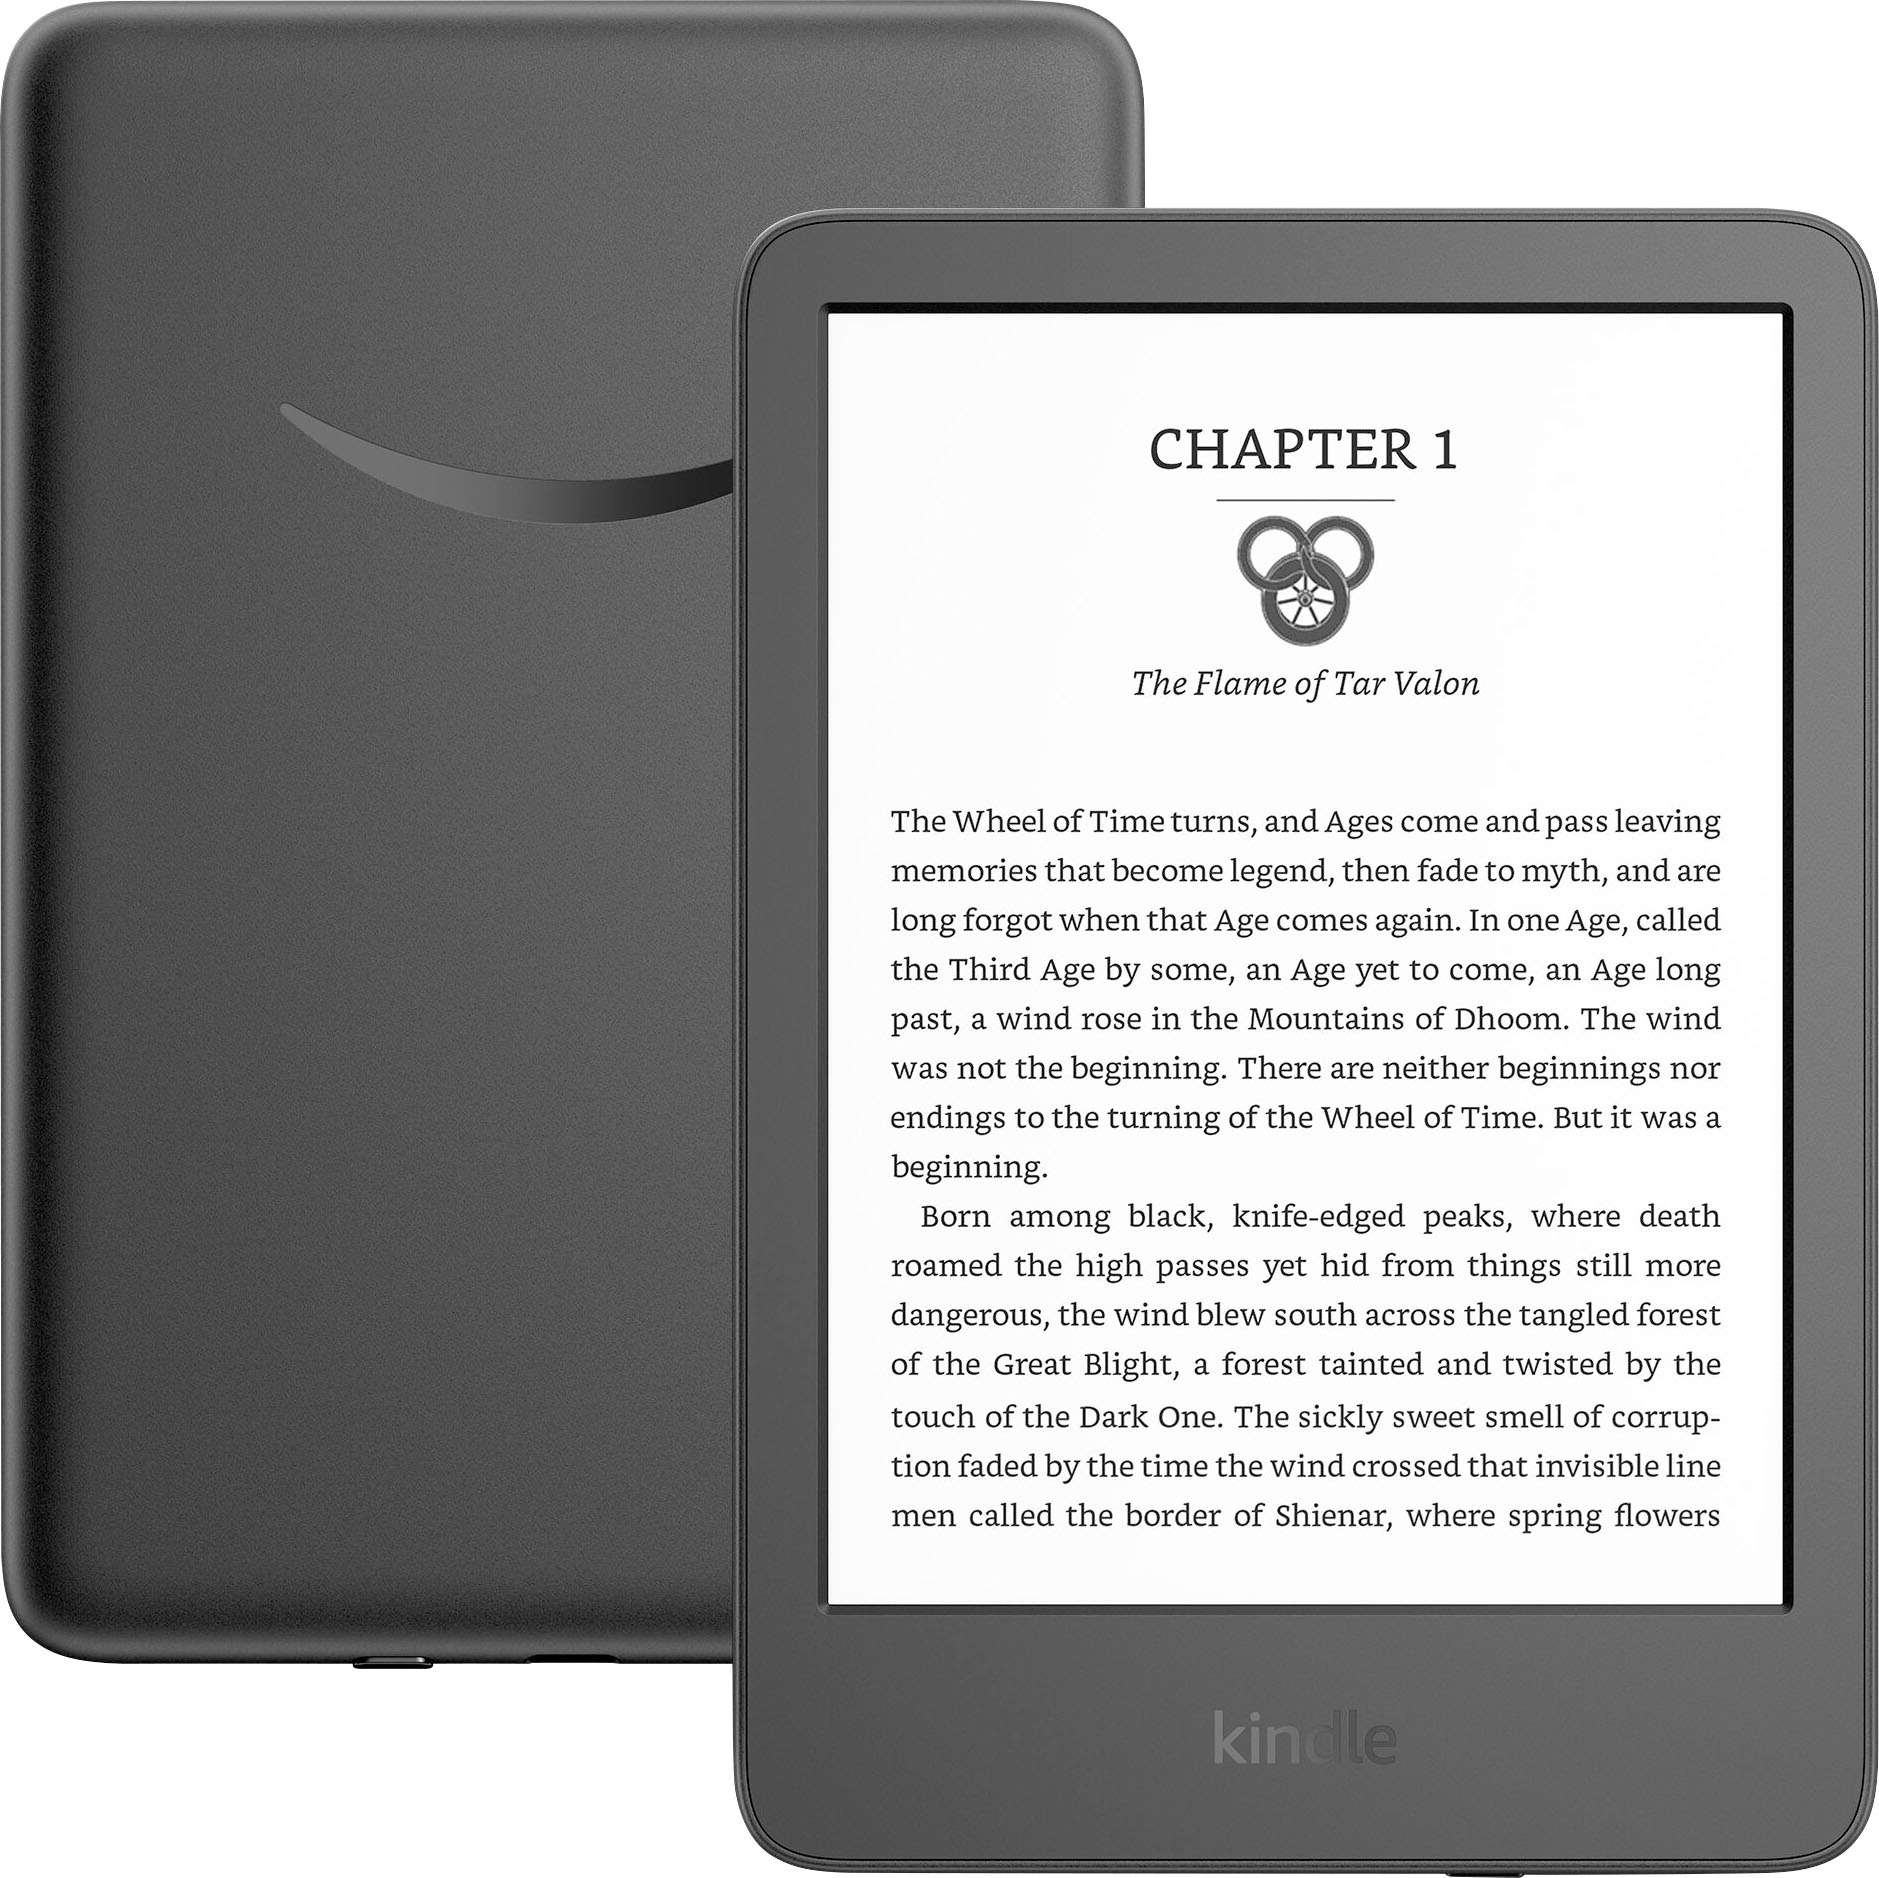 3-Pack] Supershieldz for All-new Kindle (11th/10th Generation